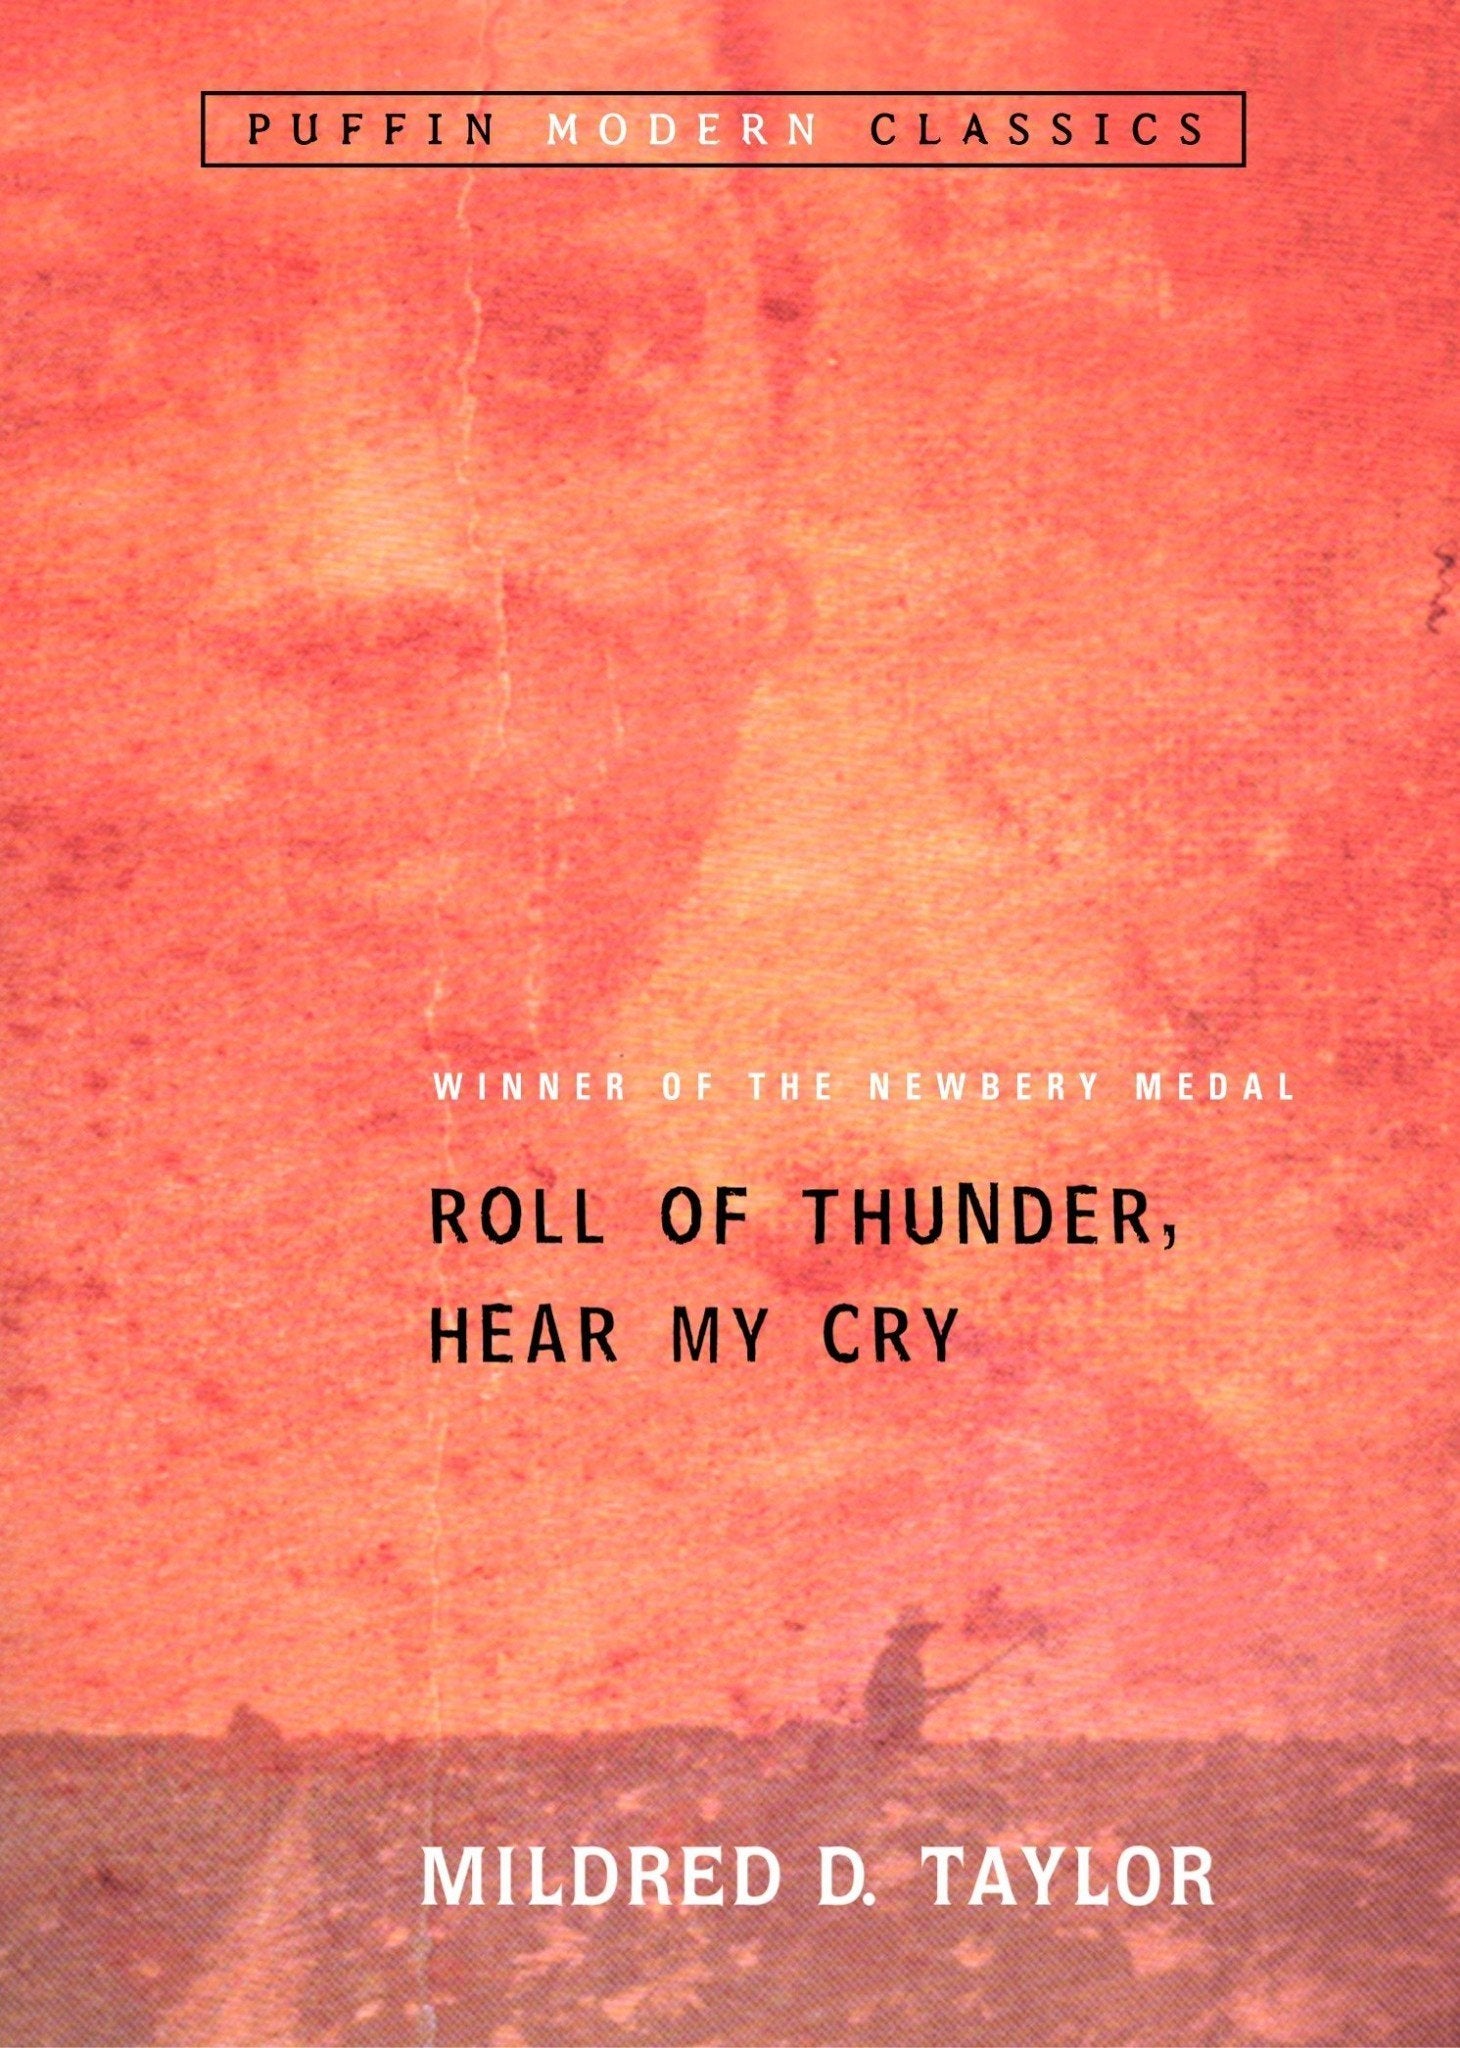 Roll of Thunder, Hear My Cry by Mildred D. Taylor (Puffin Modern Classics) - LV'S Global Media